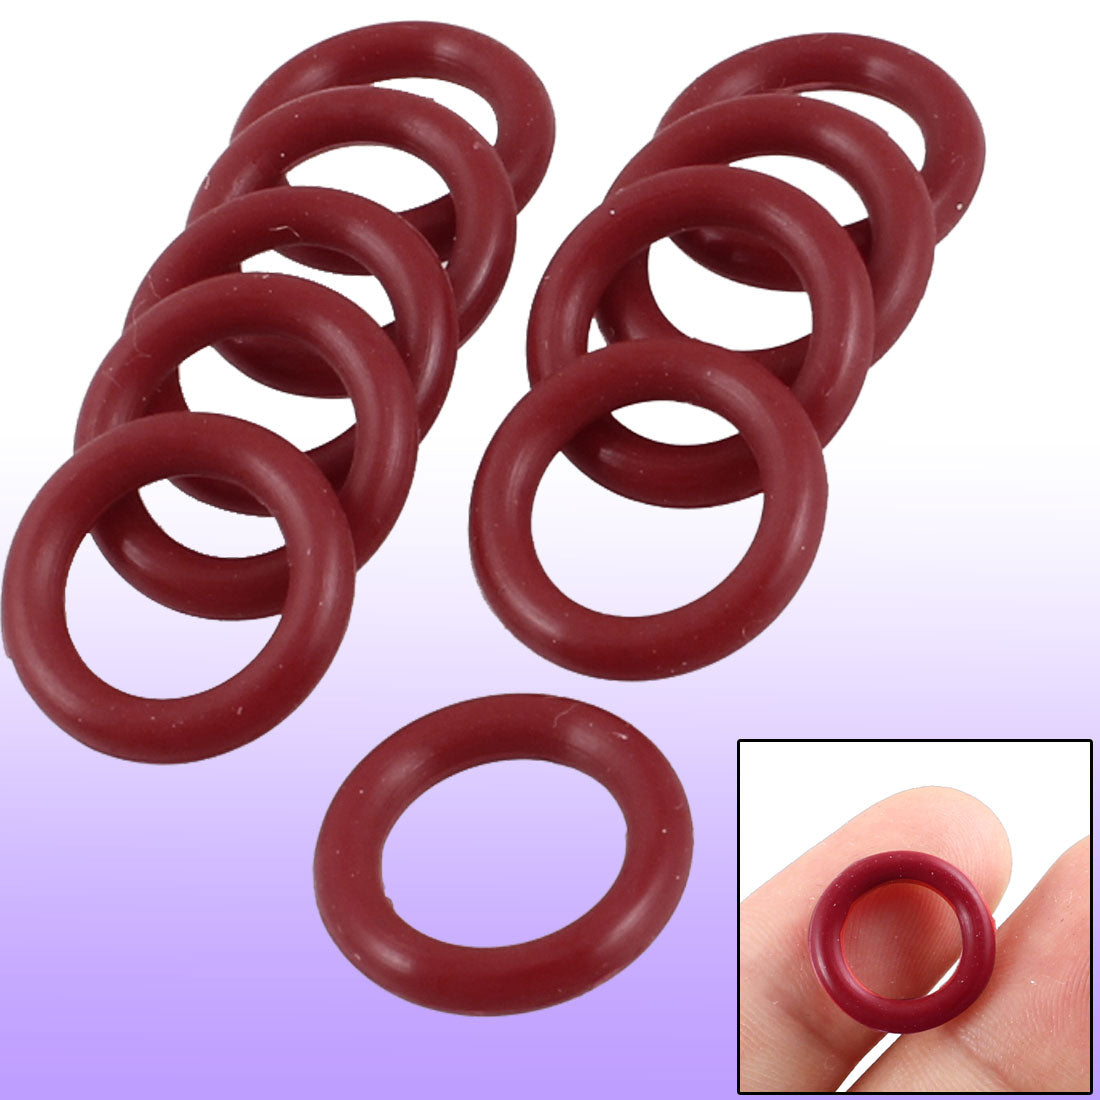 uxcell Uxcell 10 Pcs 14mm x 2.5mm Rubber O-ring Oil Seal Sealing Ring Gaskets Red